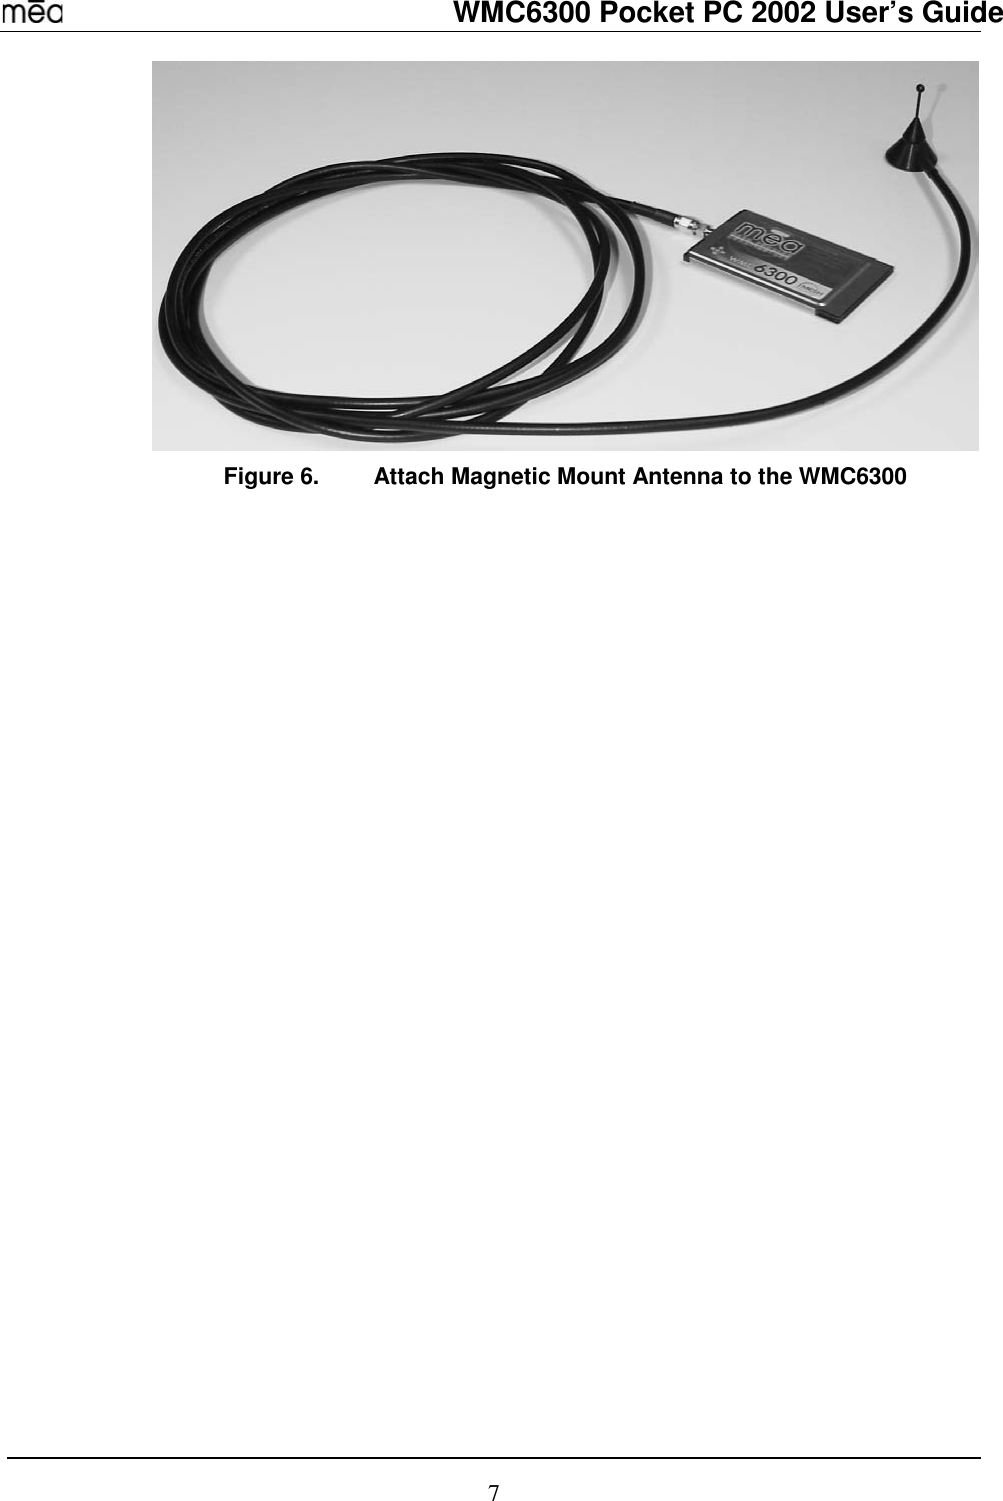   WMC6300 Pocket PC 2002 User’s Guide 7  Figure 6.  Attach Magnetic Mount Antenna to the WMC6300  